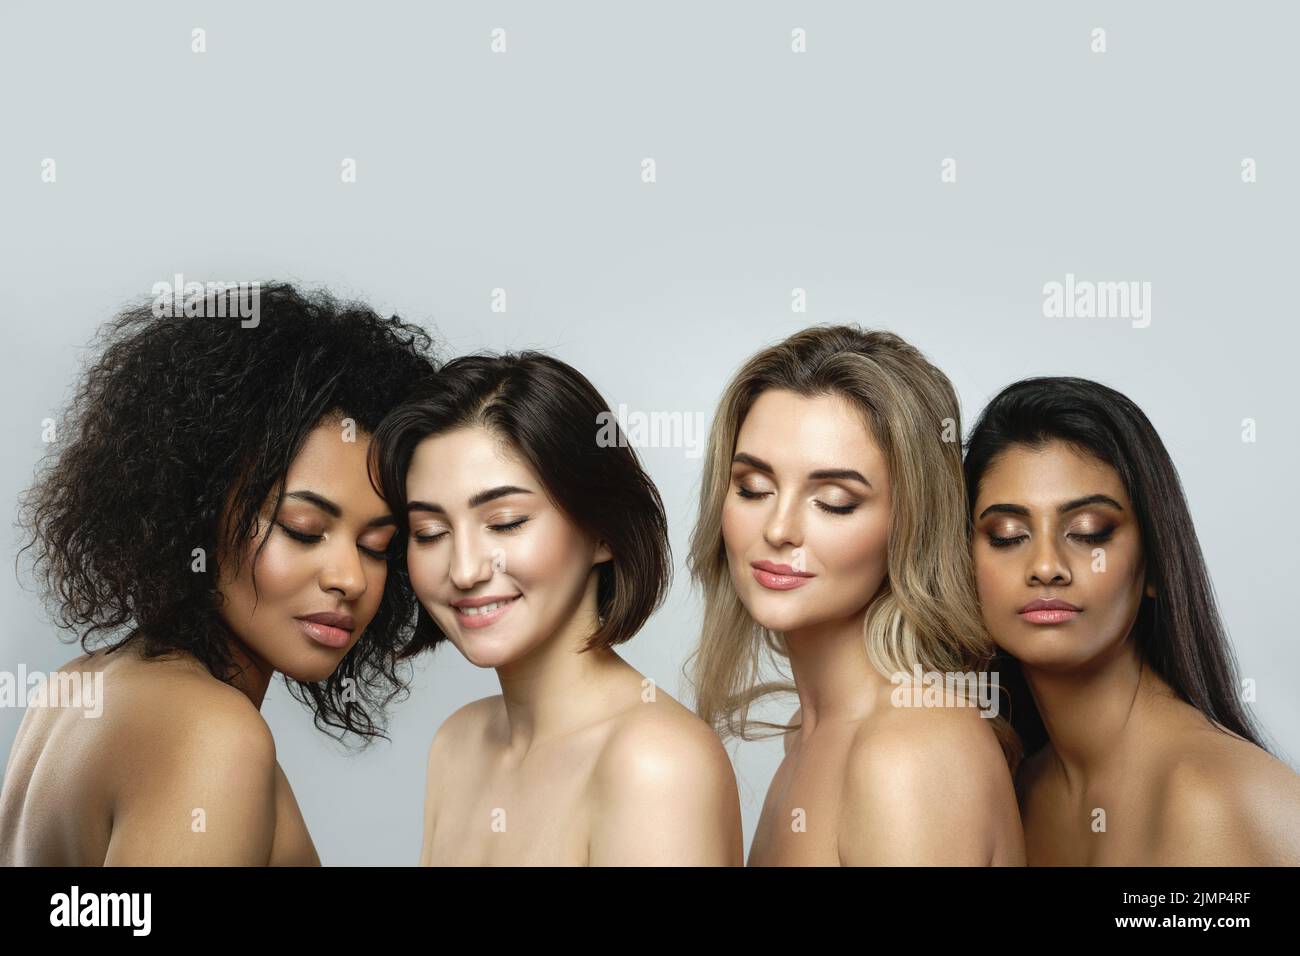 Group of beautiful women with a different ethnicity Stock Photo